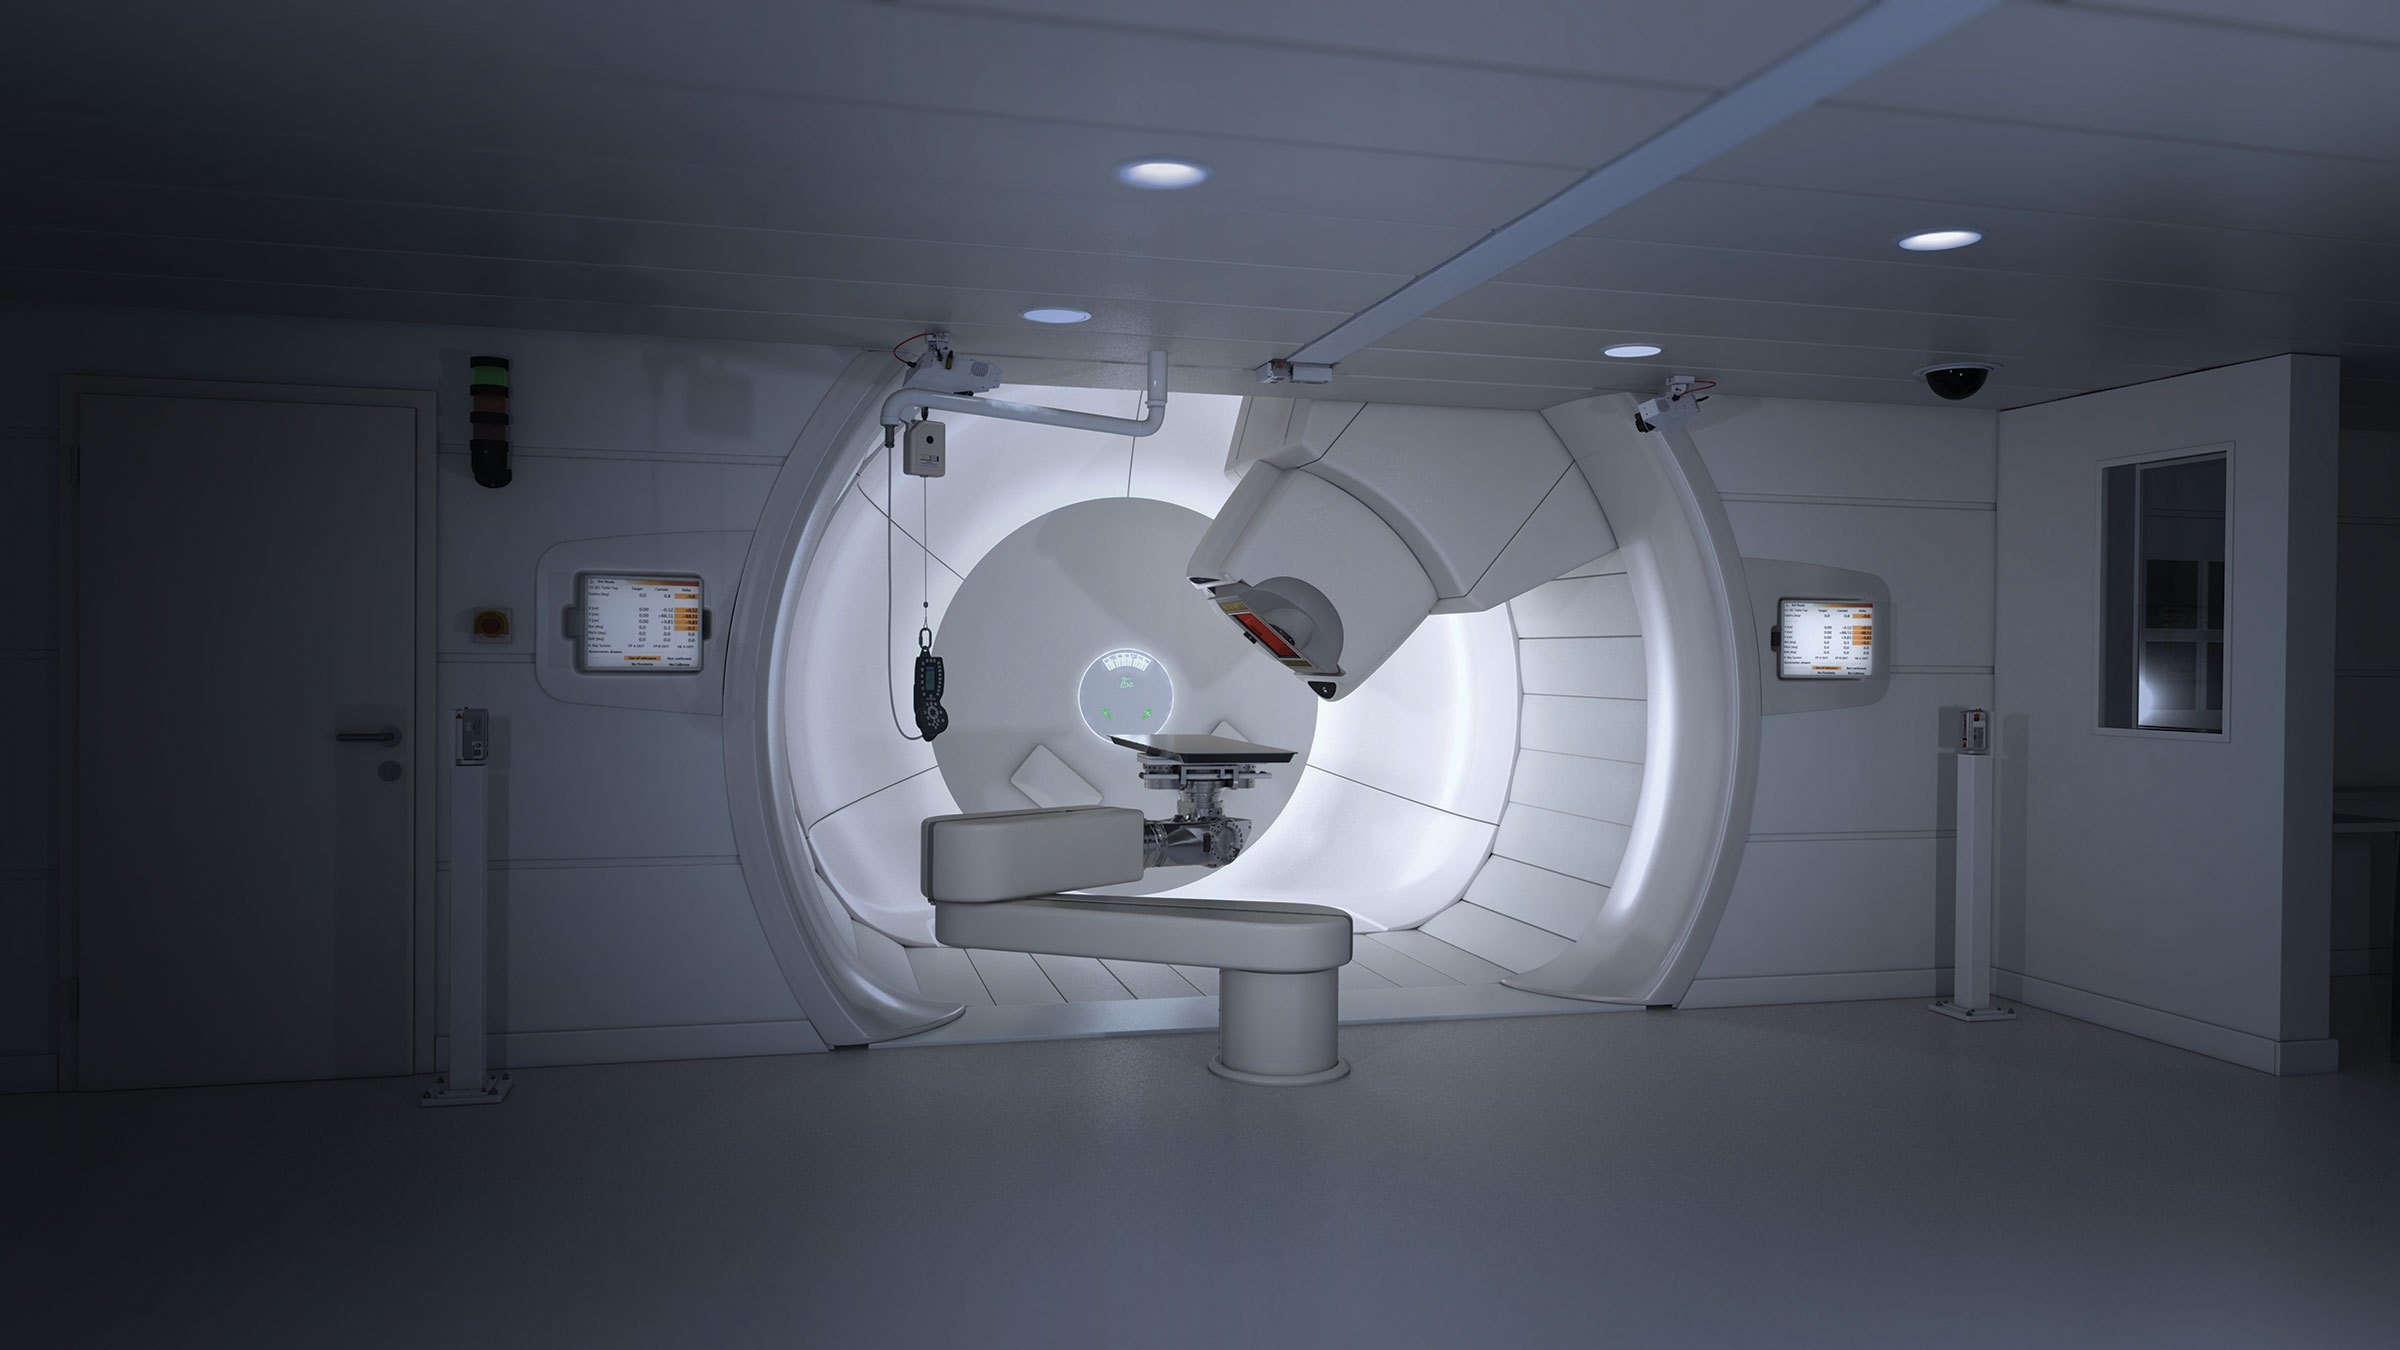 Low four-year rates of gastrointestinal (13.6 percent) and urologic issues (7.6 percent) suggest hypofractionated proton therapy as an alternative to traditional radiotherapy to reduce toxicity.